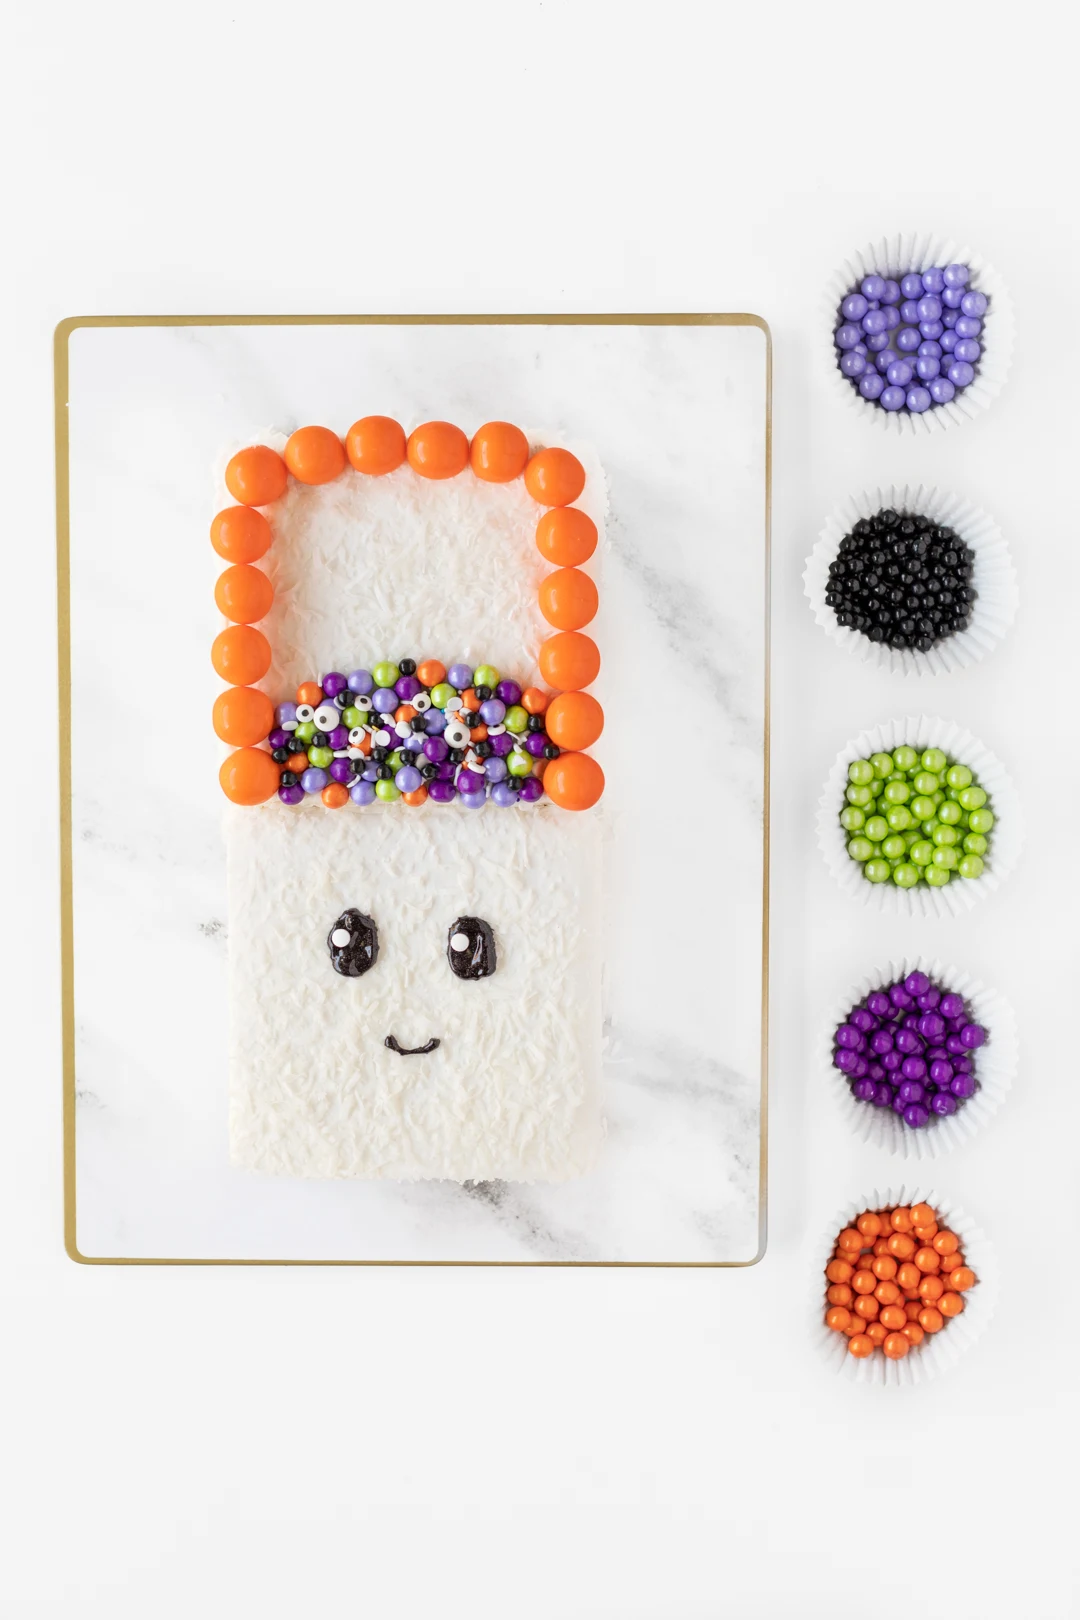 colorful candies to decorate halloween cake